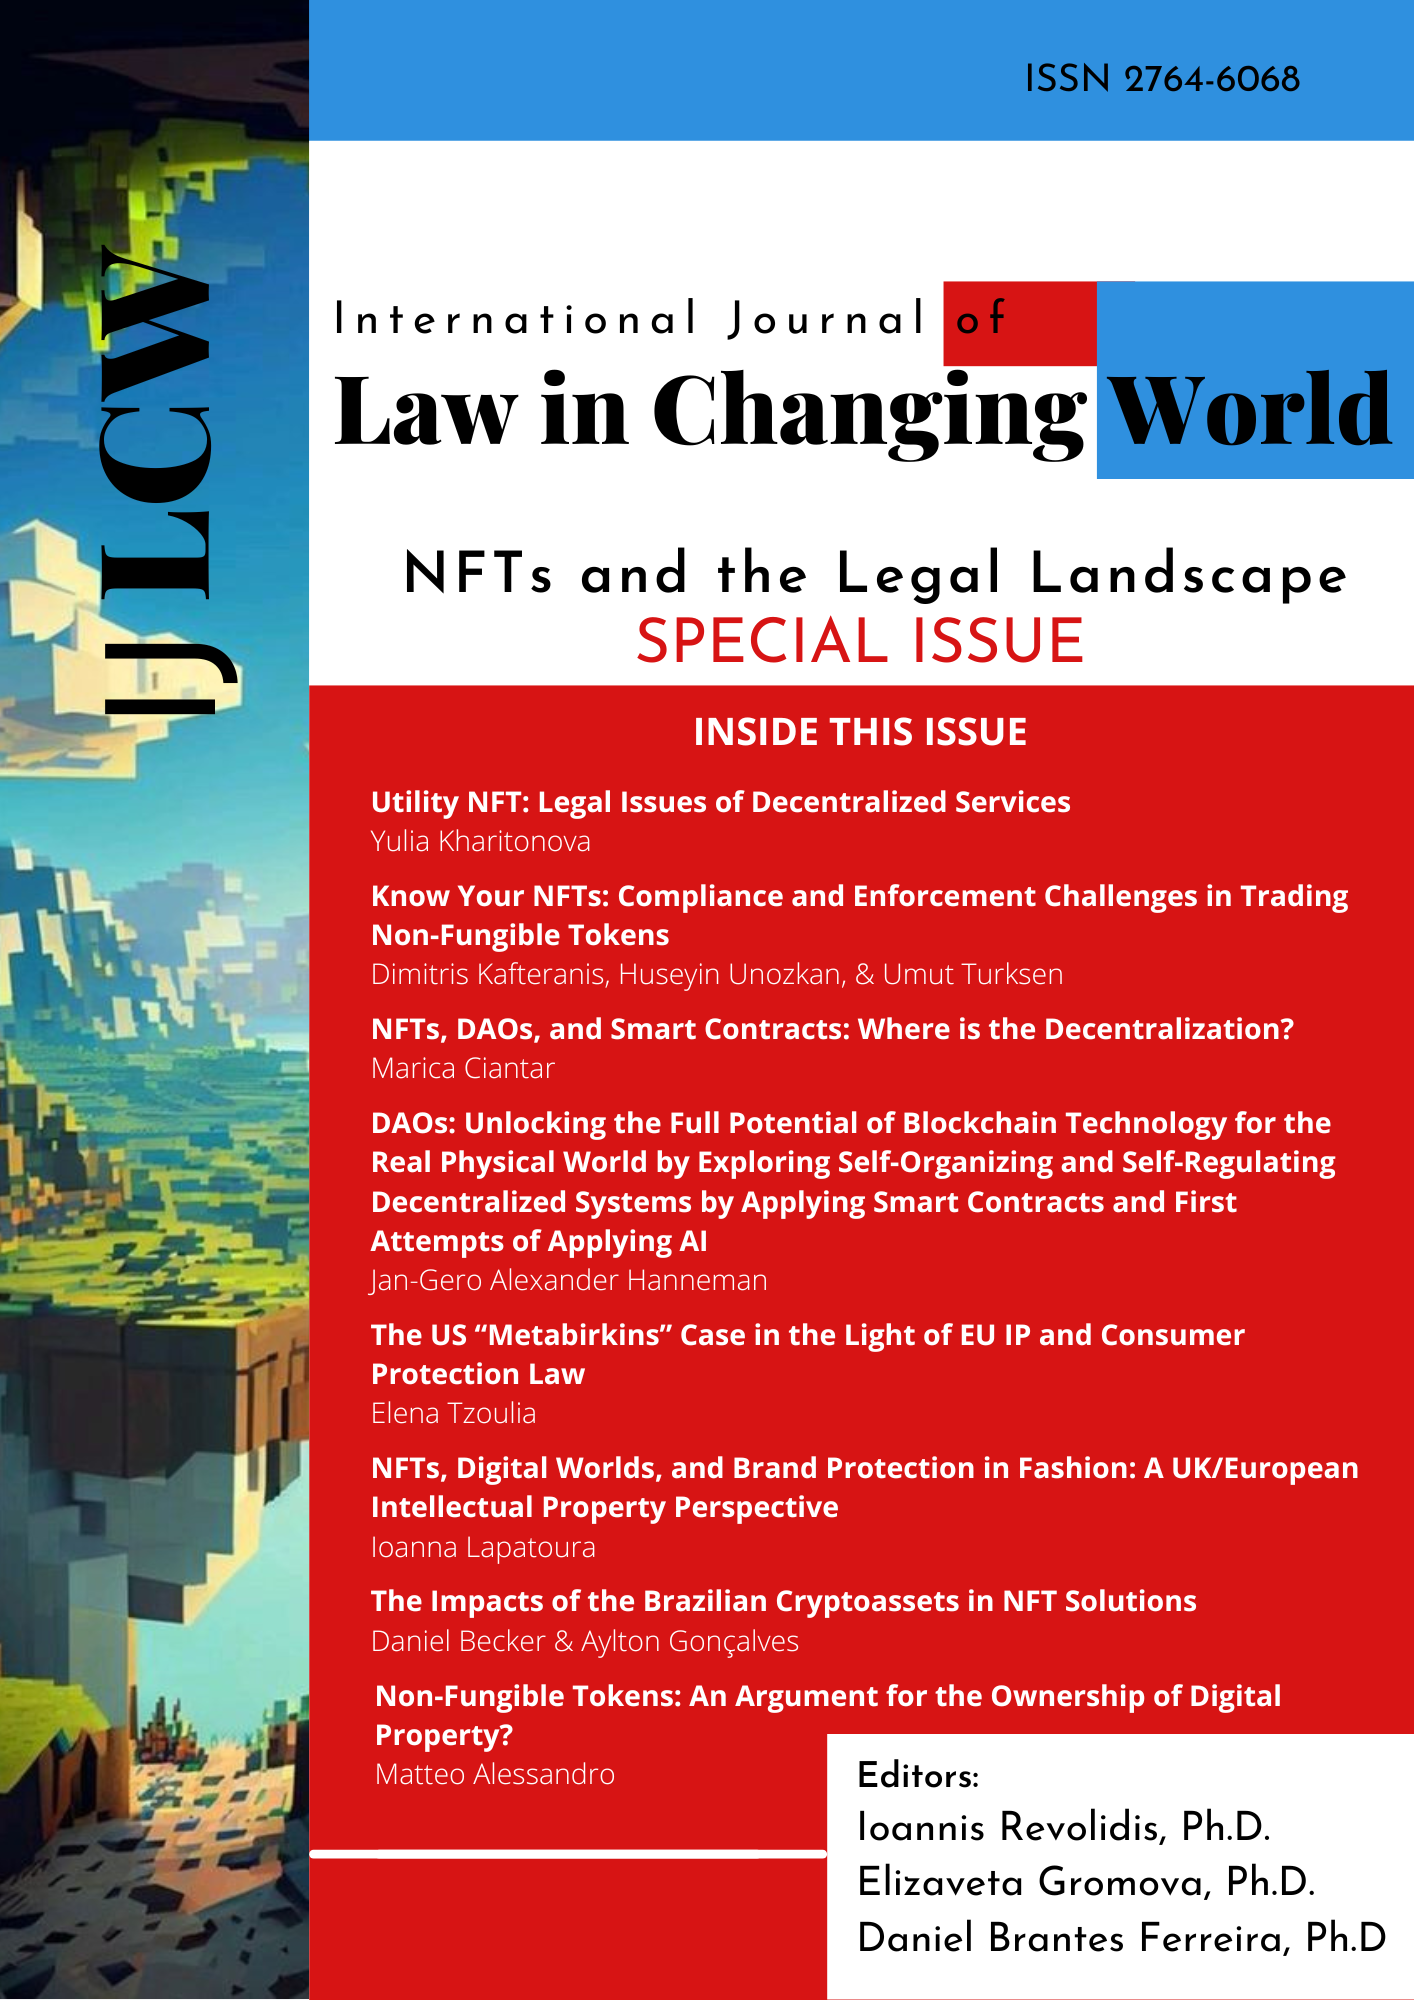 					View The International Journal of Law in Changing World Special Issue: NFTs and The Legal Landscape
				